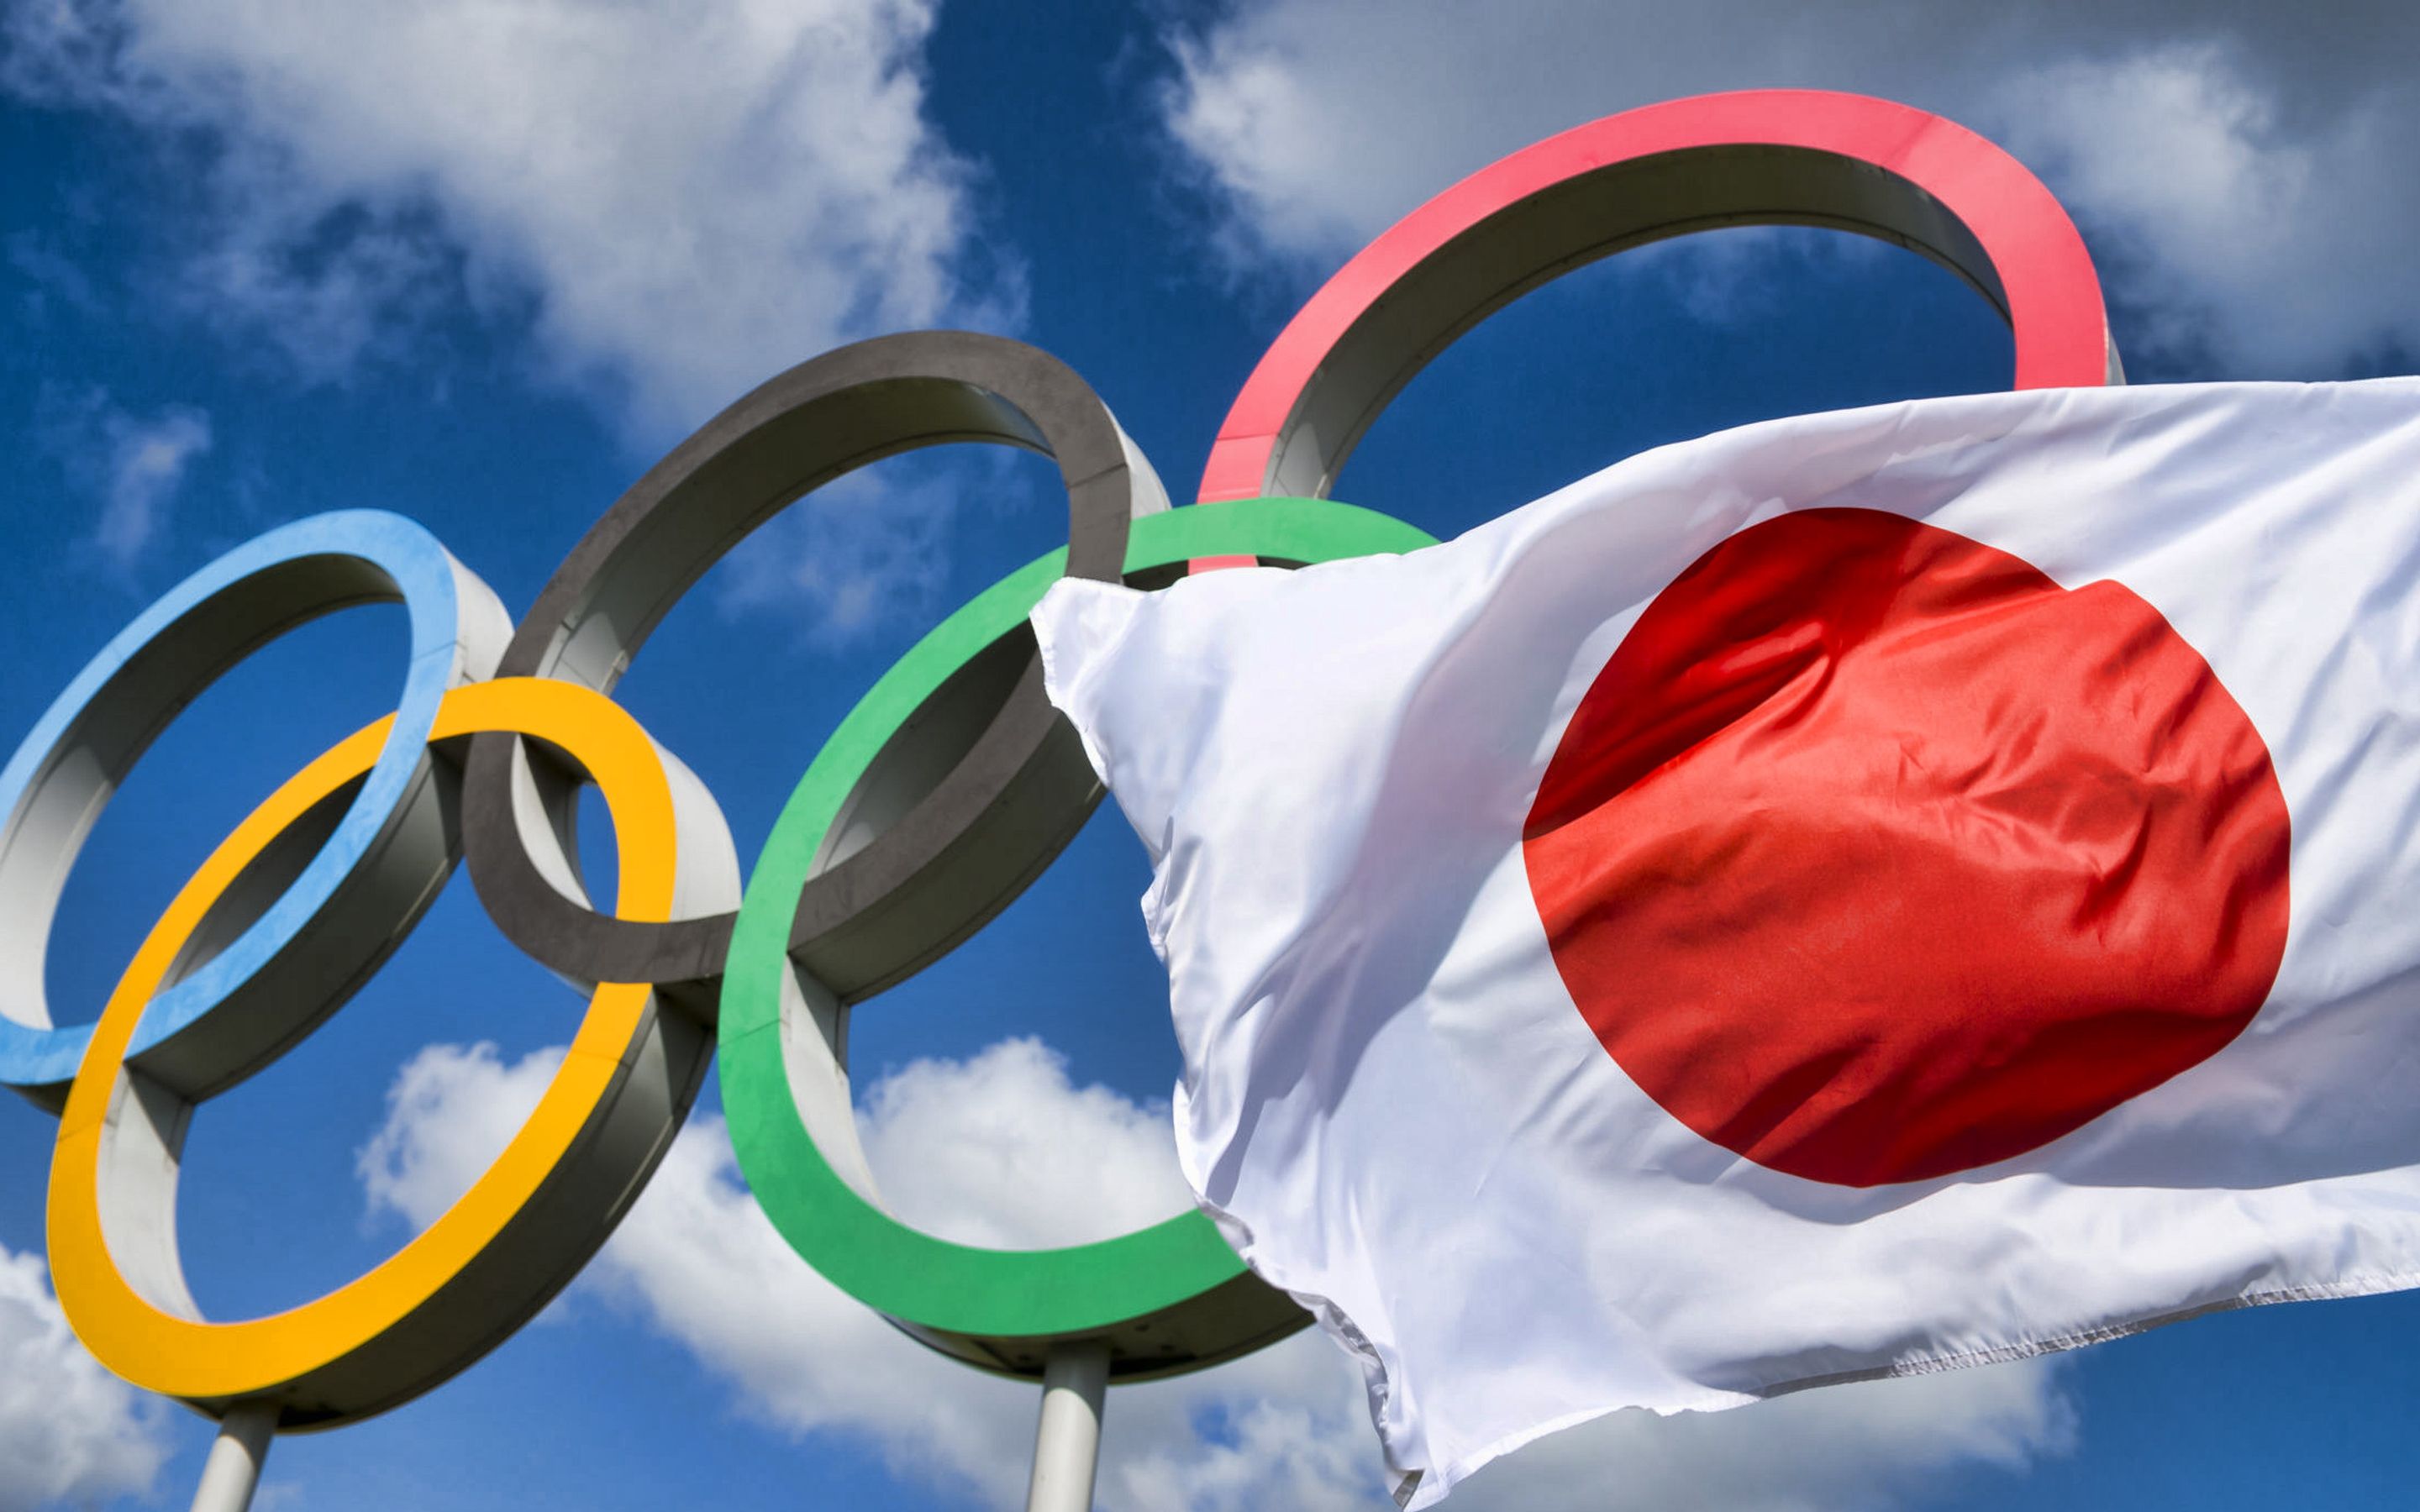 Download wallpaper 2020 Summer Olympics, Japan Games of the XXXII Olympiad, Tokyo Flag of Japan, Olympic rings, Japan, Tokyo for desktop with resolution 2880x1800. High Quality HD picture wallpaper